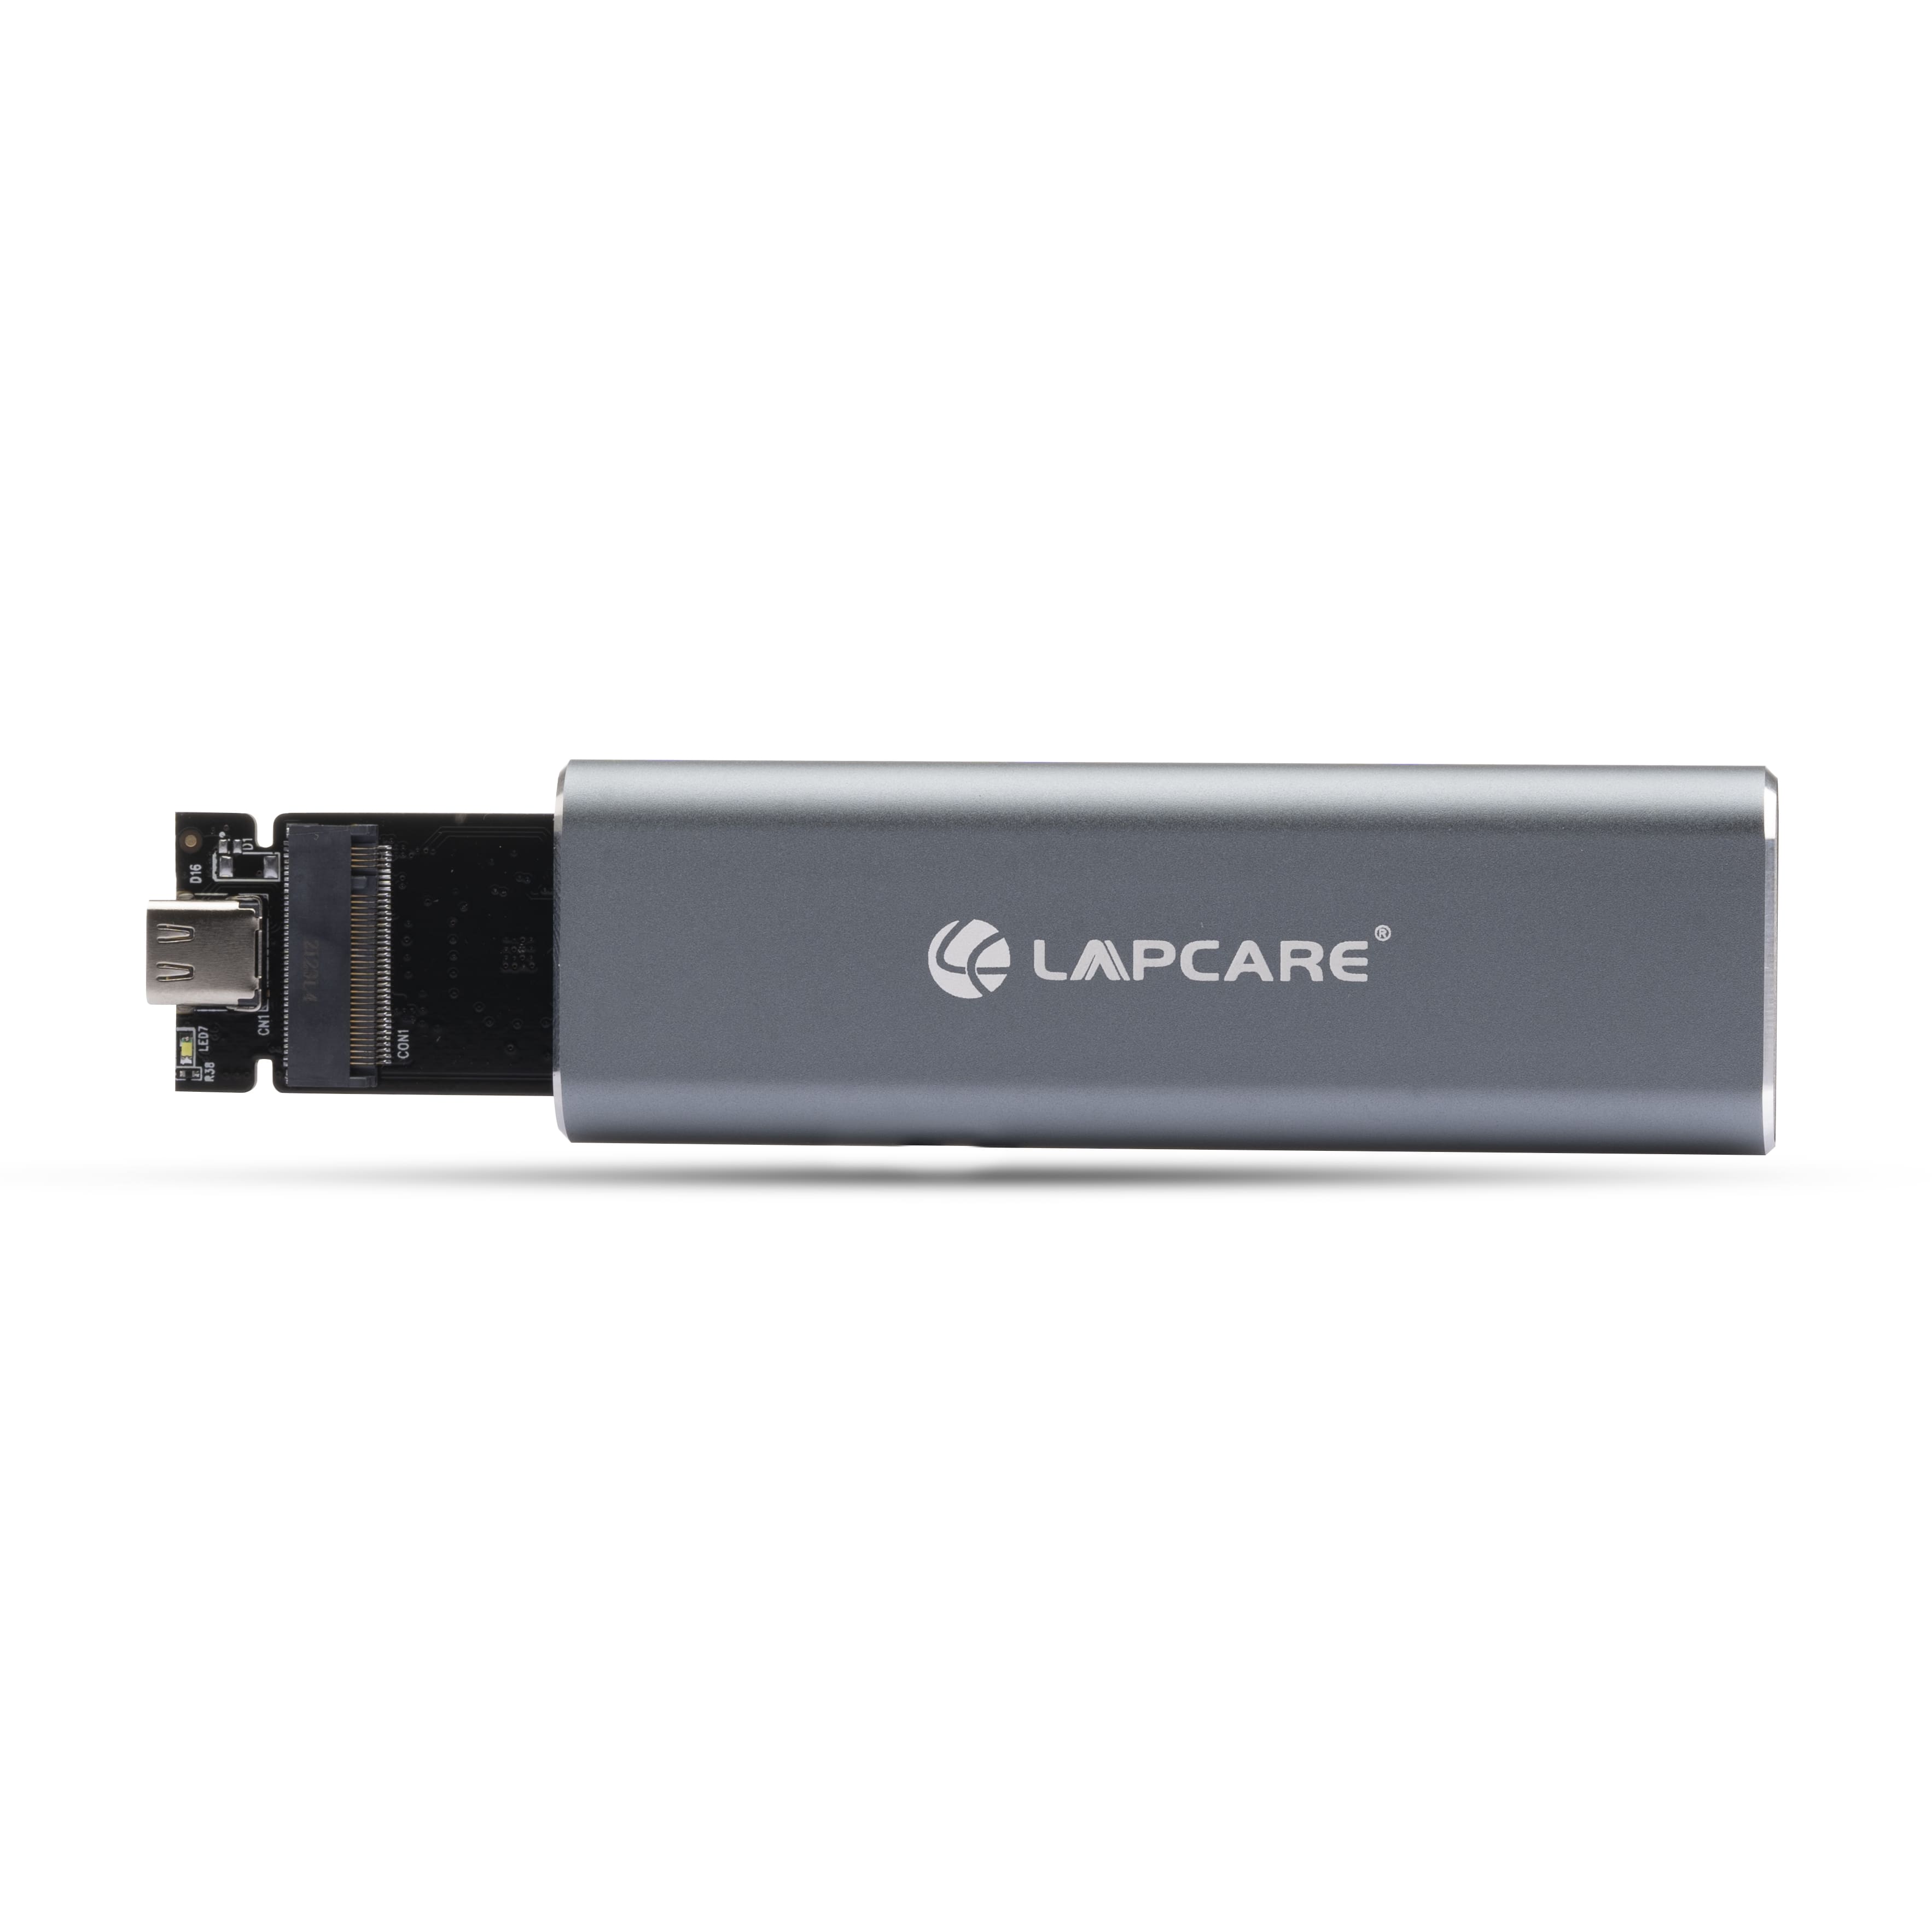 Lapcare M.2 NVMe SSD Casing with cable